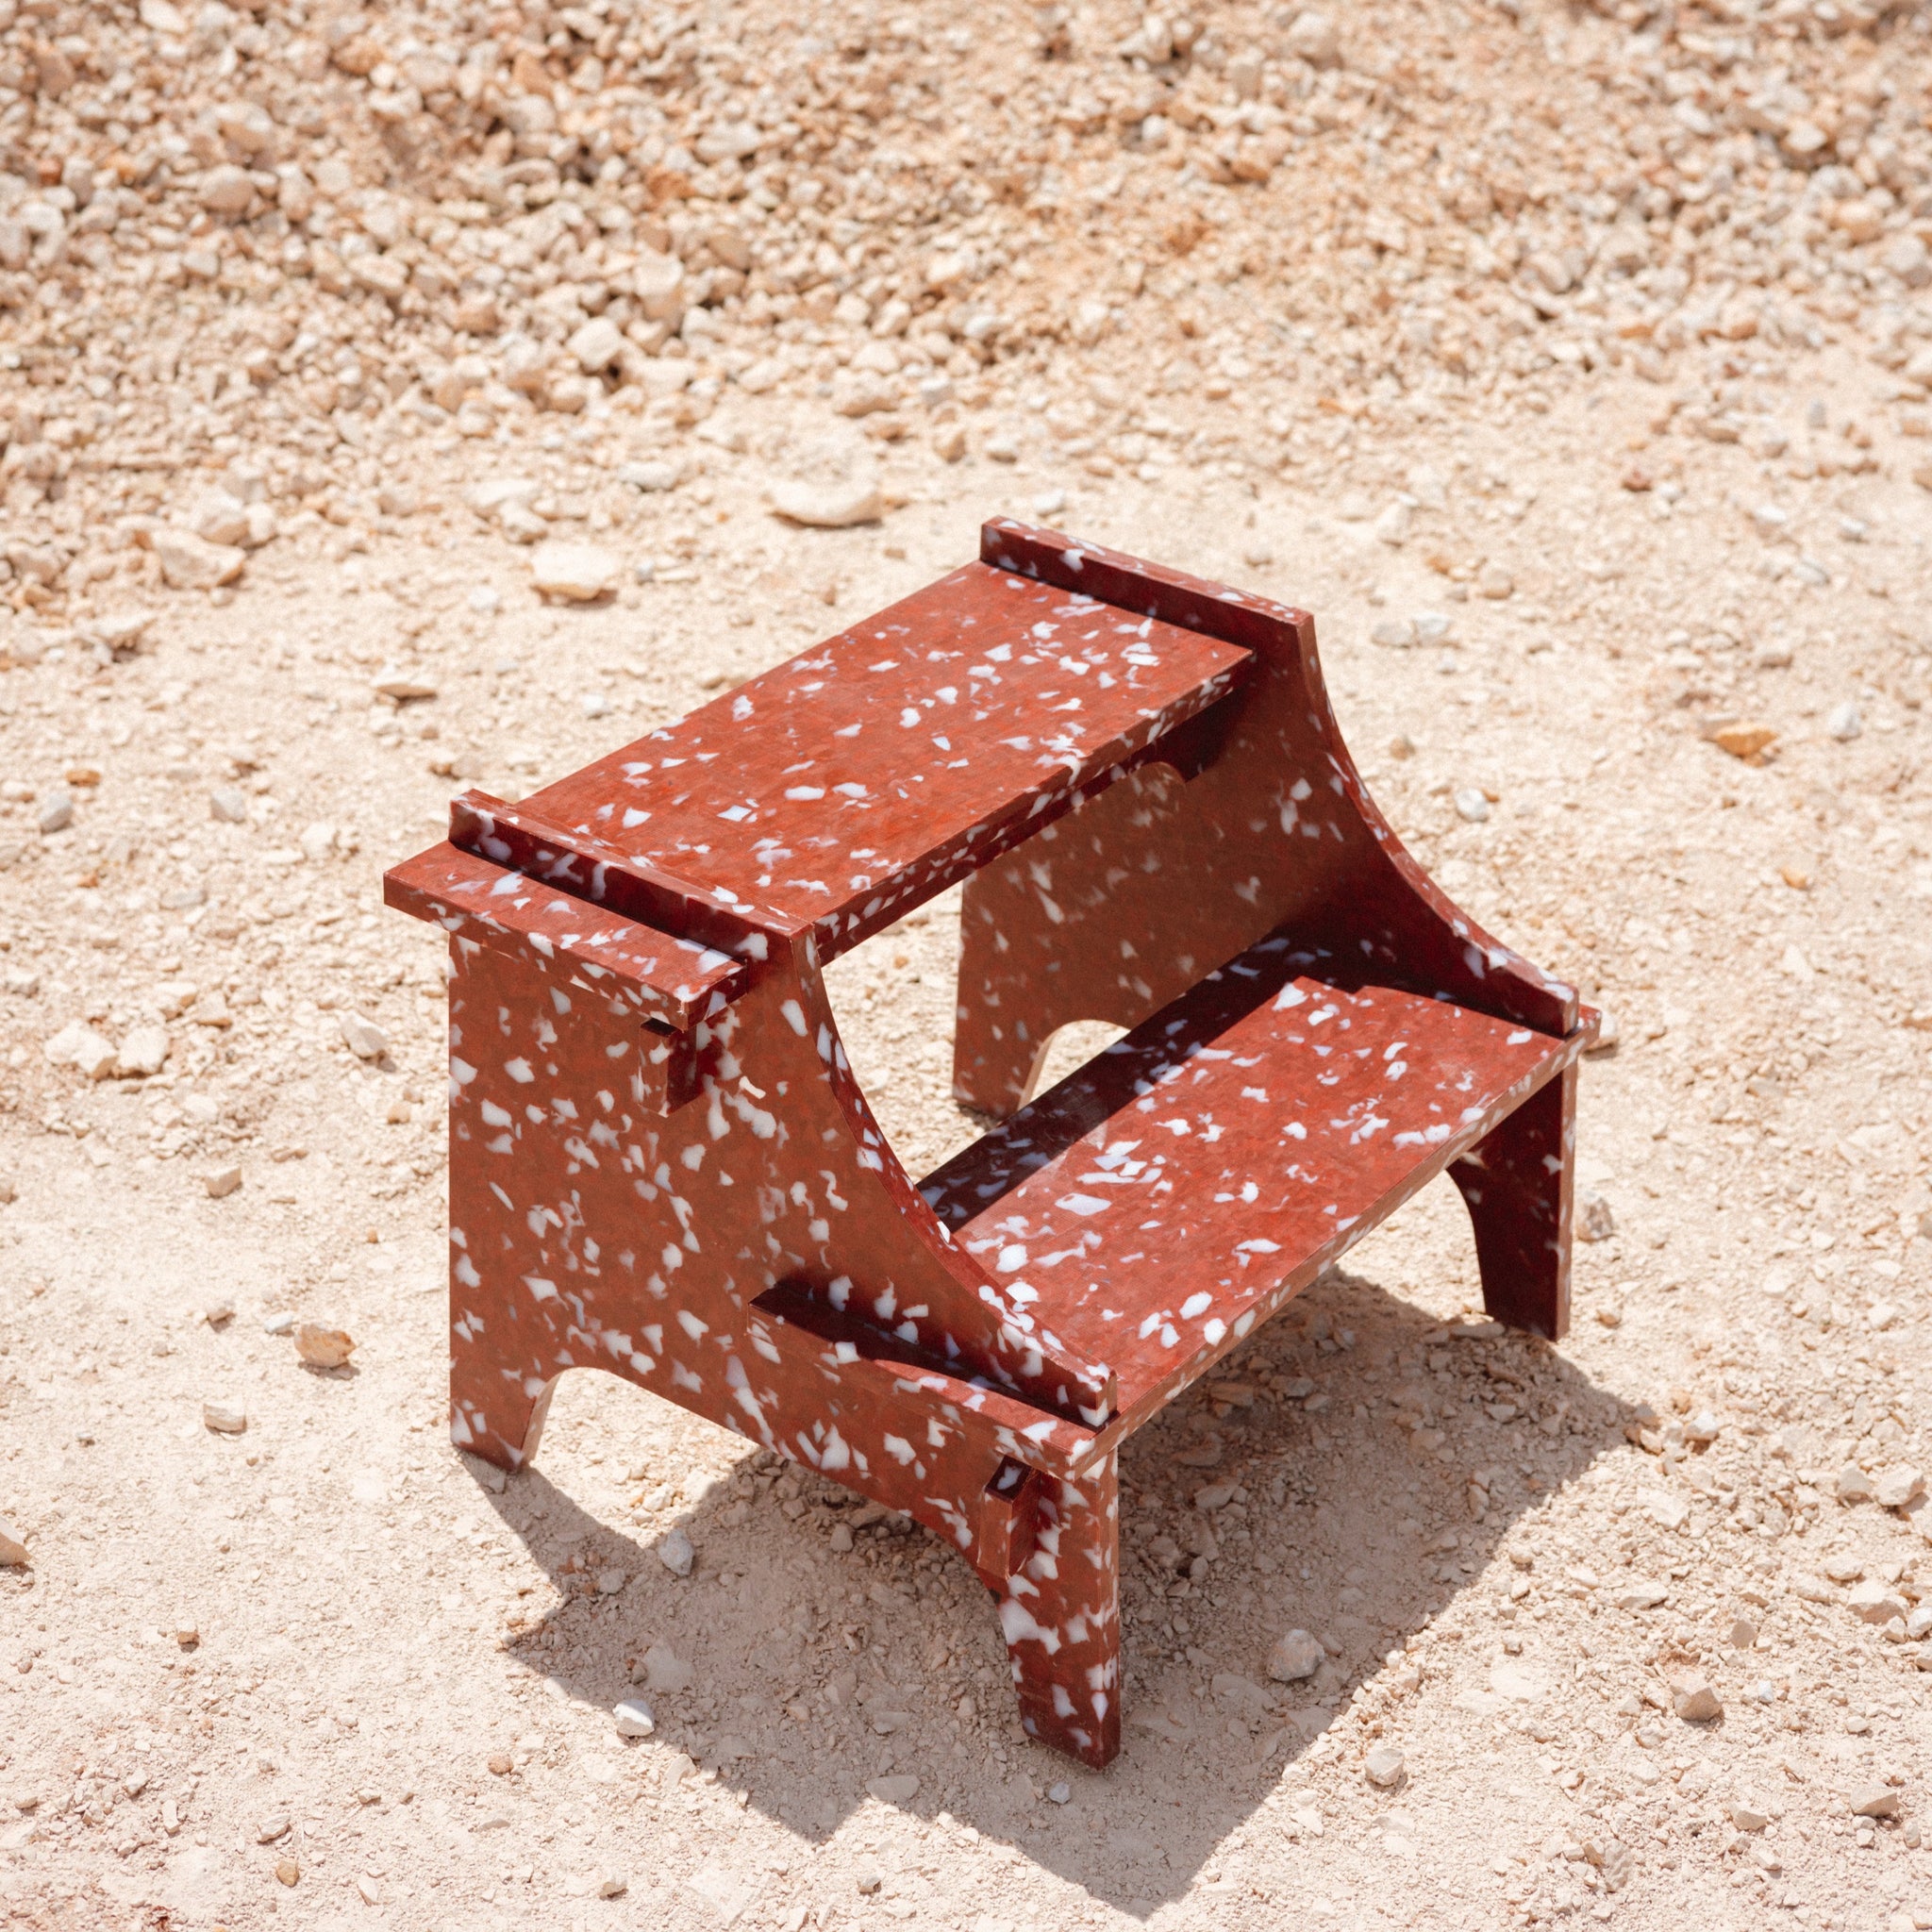 RED STEP STOOL BY THE MINIMONO PROJECT - BRAND FOR ECO FRIENDLY - PLAYFUL - MULTI FUNCTIONAL - SUSTAINABLE - HIGH QUALITY - DESIGN FURNITURE FROM RECYCLED PLASTIC FOR BOTH ADULT AND CHILDREN MADE IN BERLIN GERMANY